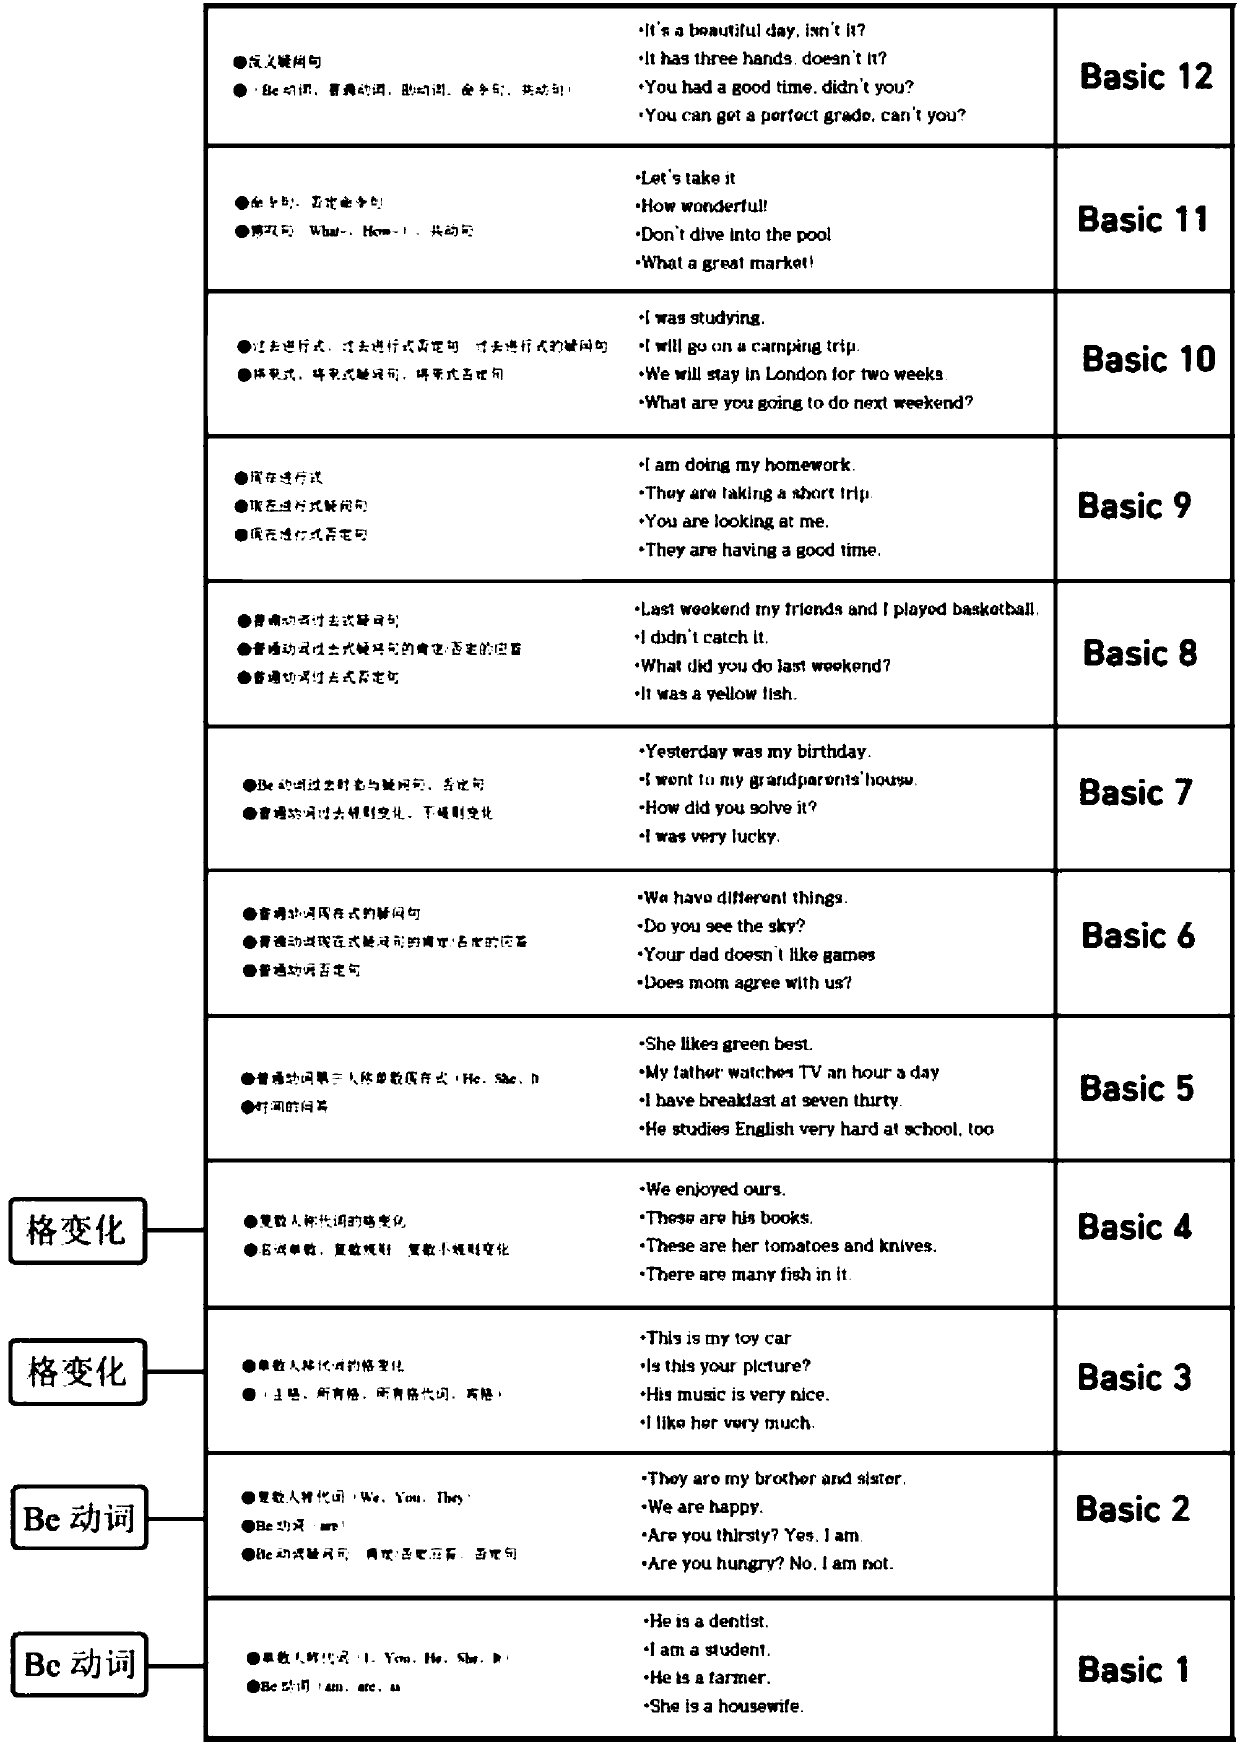 Sentence build-up english learning system, english learning method using same, and teaching method therefor